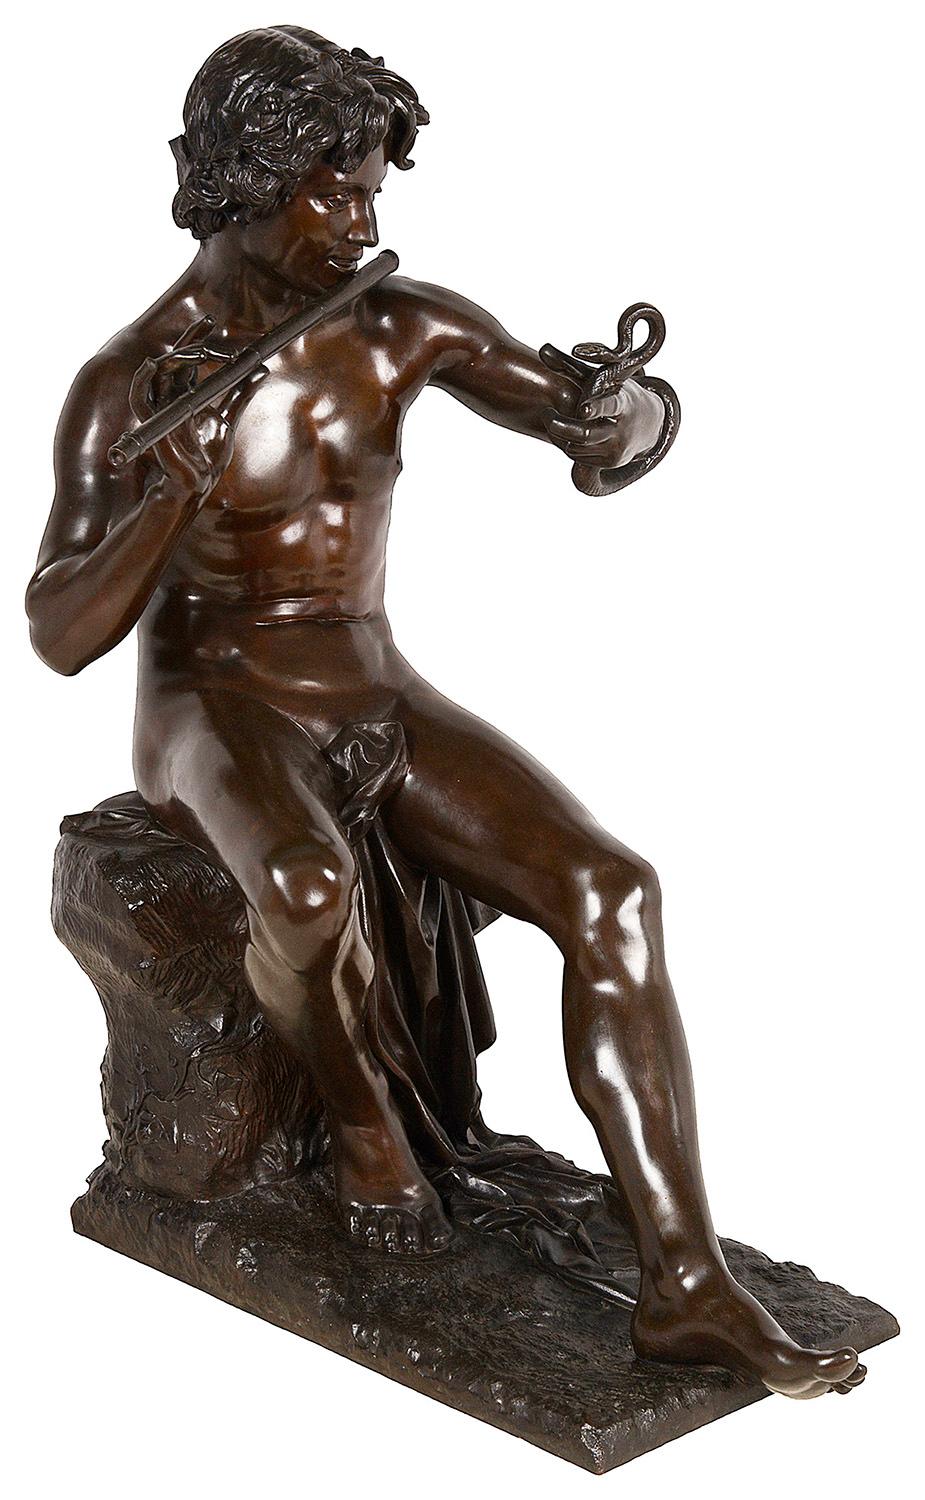 Handsome nude male snake charmer seated and playing a flute while holding the snake, gazing at it and watching it move. The sculpture has a beautiful patina signed A. Thabard. 
Thabard ( Adolphe Martial Thabard, important French listed sculptor